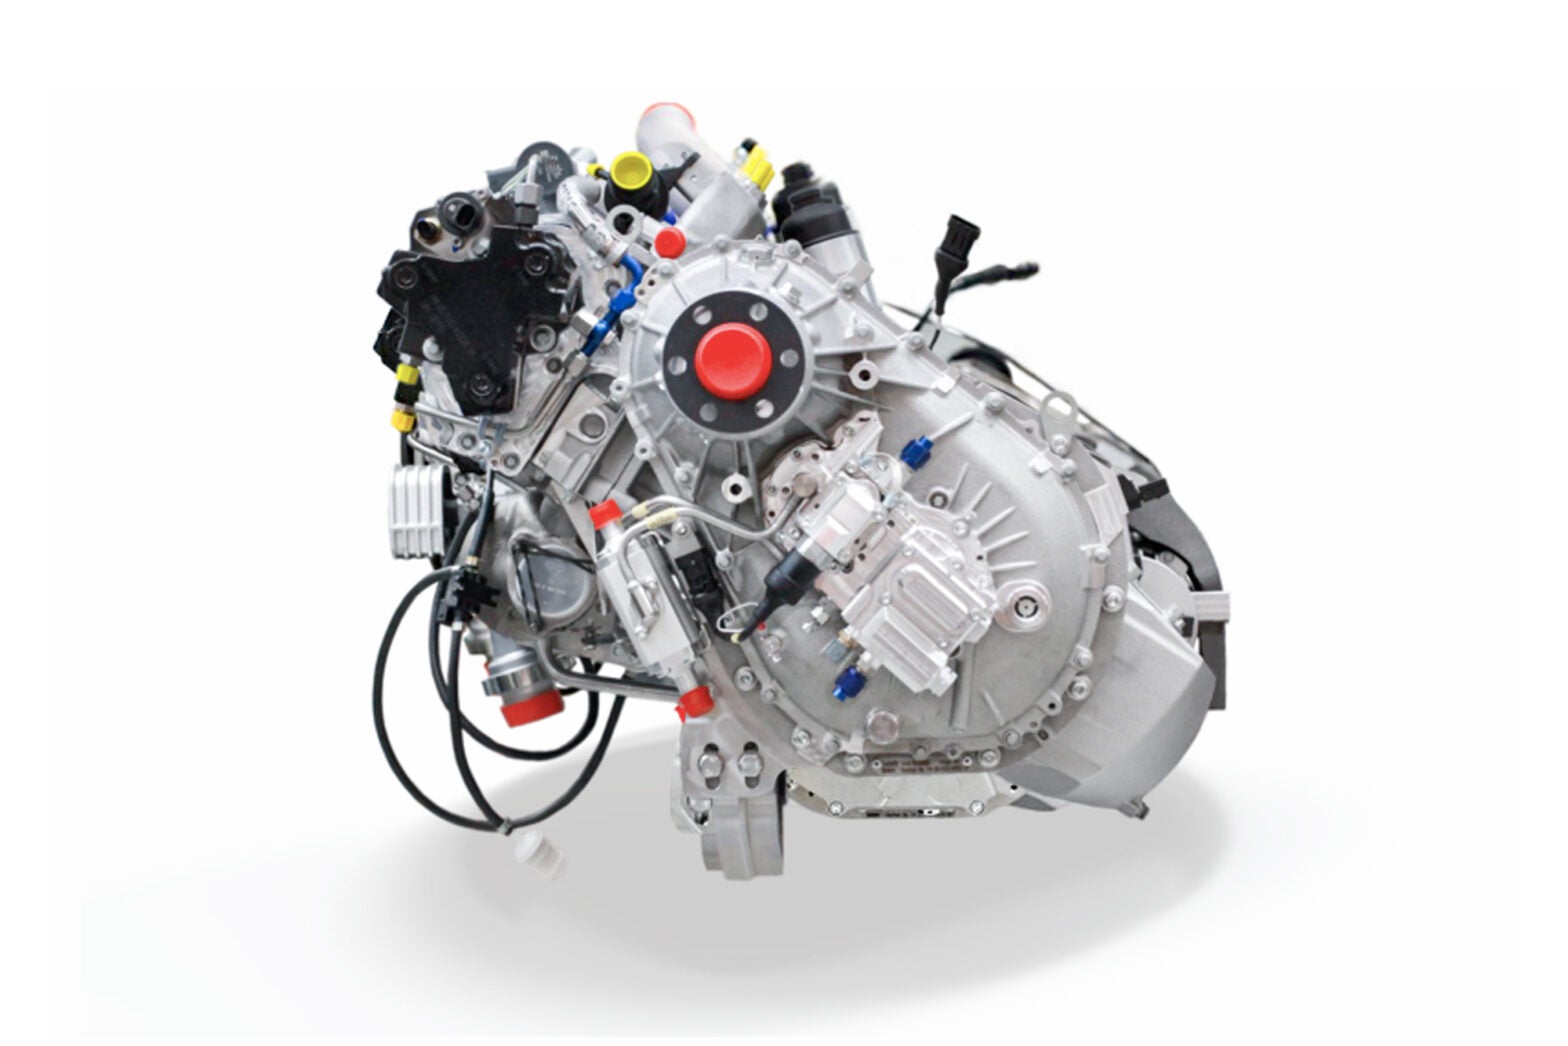 Continental Gains EASA Type Certificate on CD-170 Engine